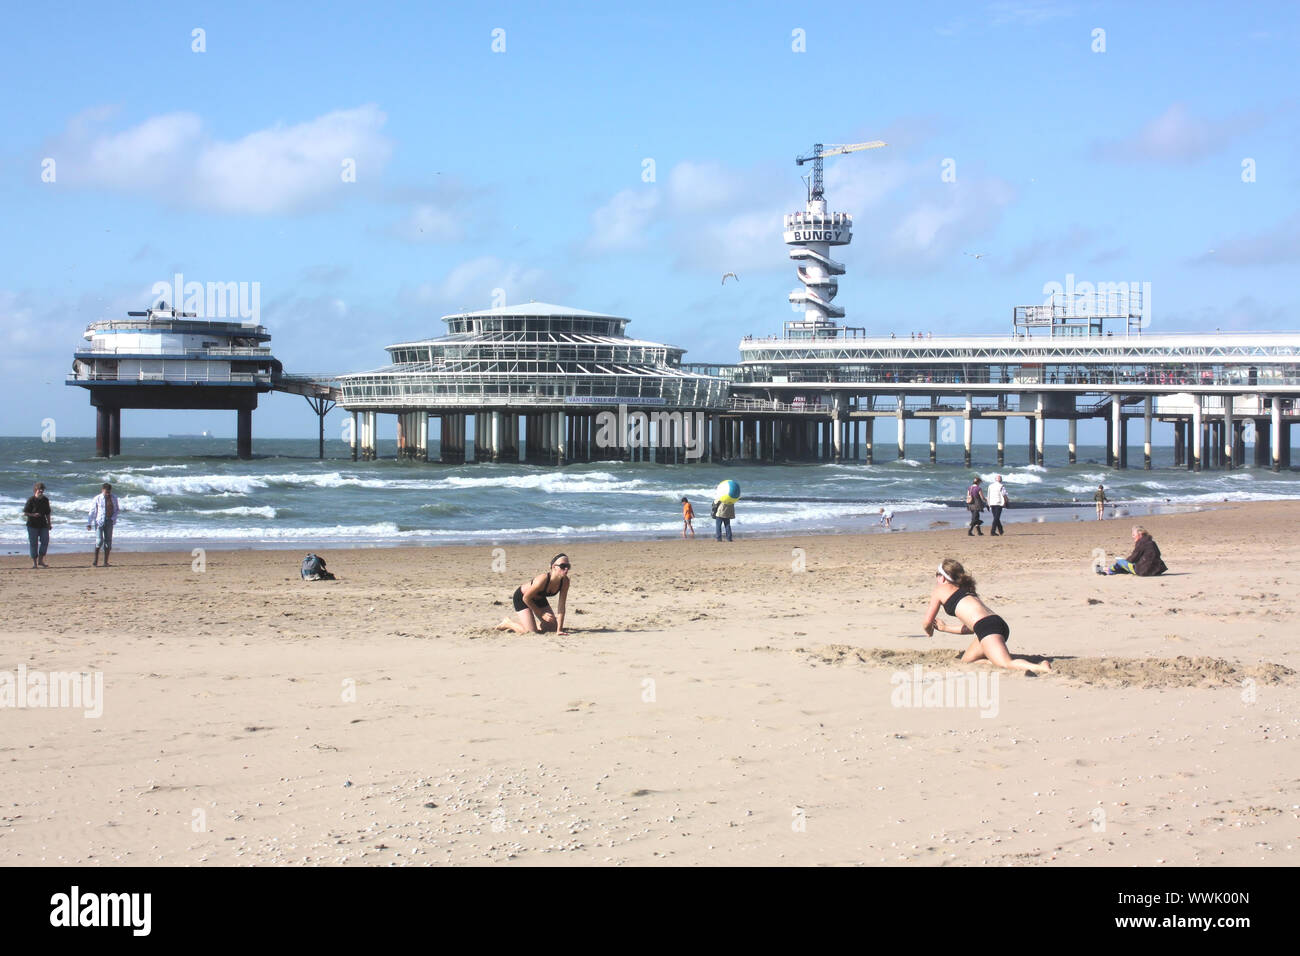 https://c8.alamy.com/comp/WWK00N/de-pier-in-scheveningen-gives-a-magnificent-view-of-the-shoreline-and-the-sea-the-underground-is-sealed-with-strong-glass-walls-and-has-many-shops-WWK00N.jpg